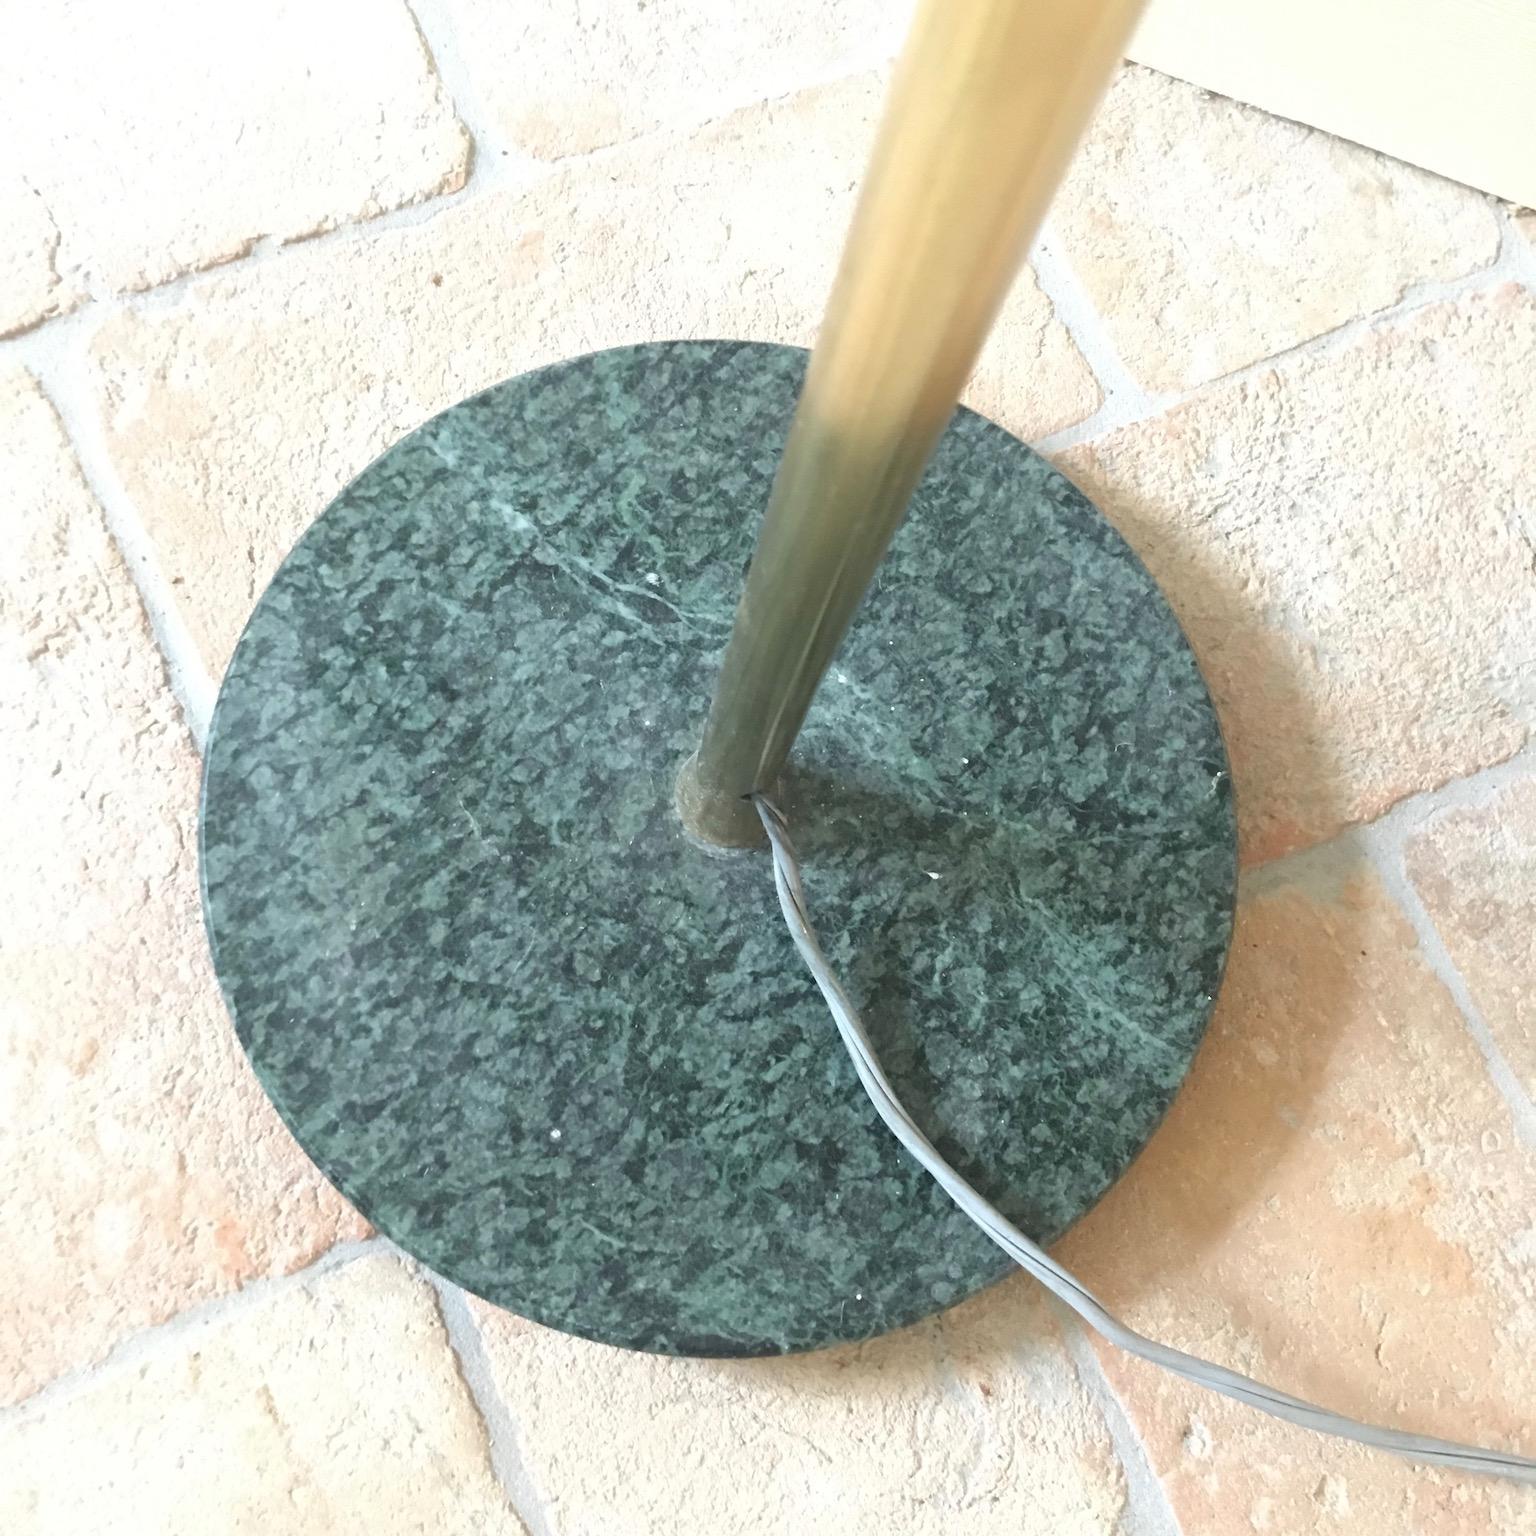 Classic Italian midcentury standing floor lamp. Top arm pivots with wonderful brass joint. Sits on a green marble base. Minor colour fading to metal shade, see picture. Floor height to elbow 42